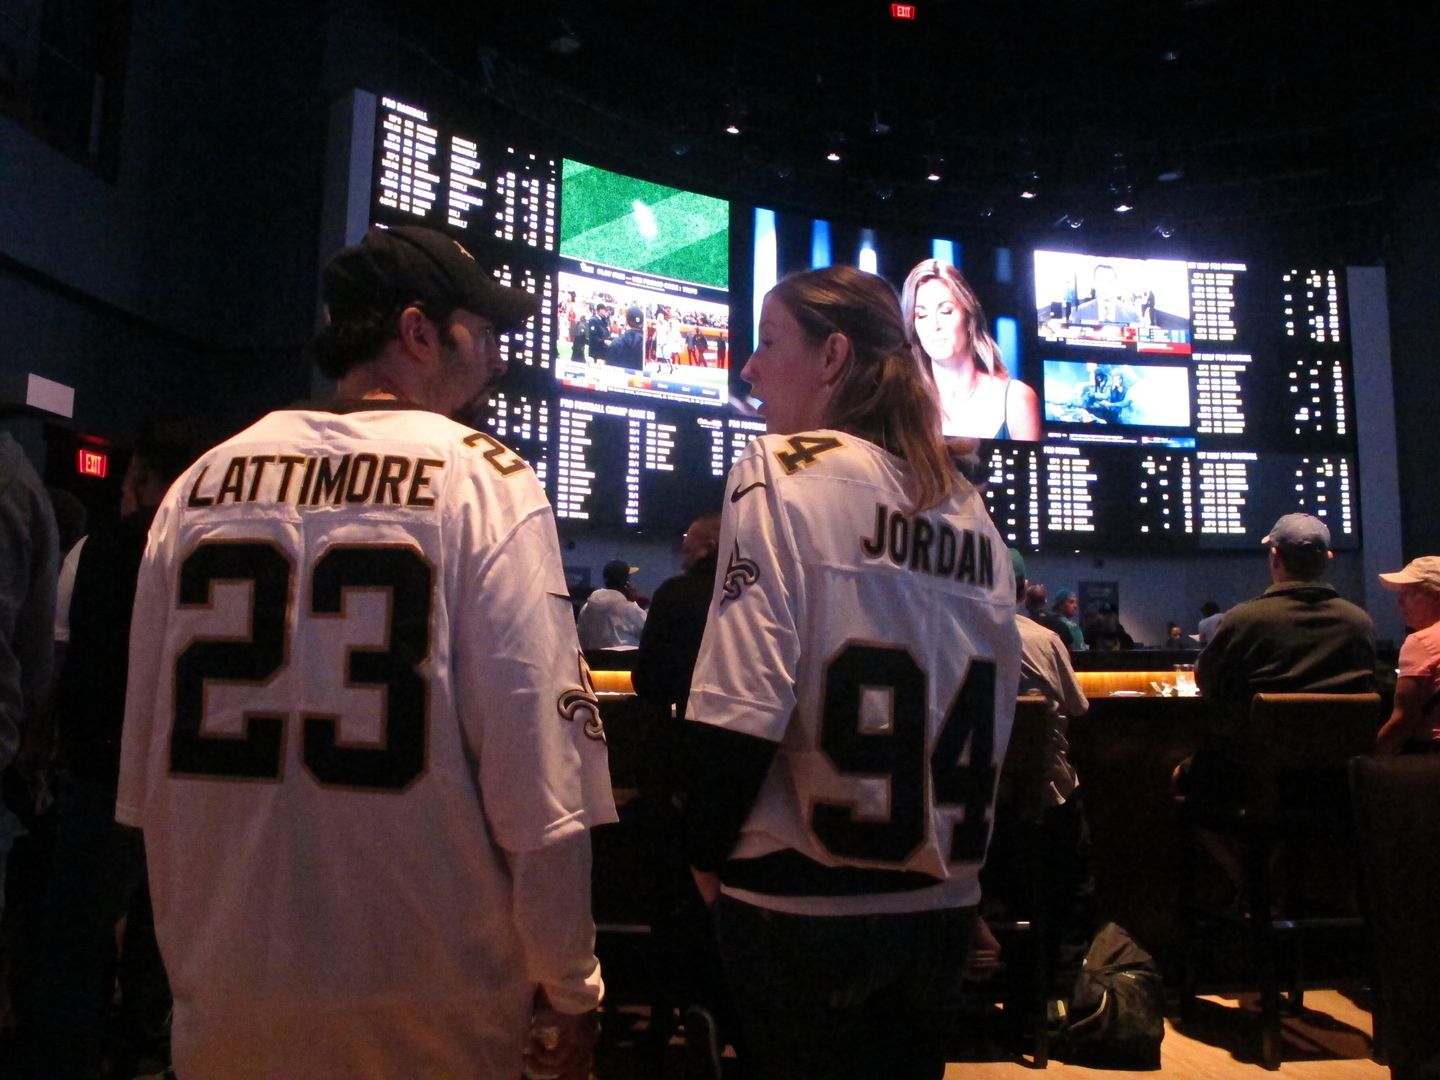 Amount wagered in U.S. online sports gambling jumps 98% in past year